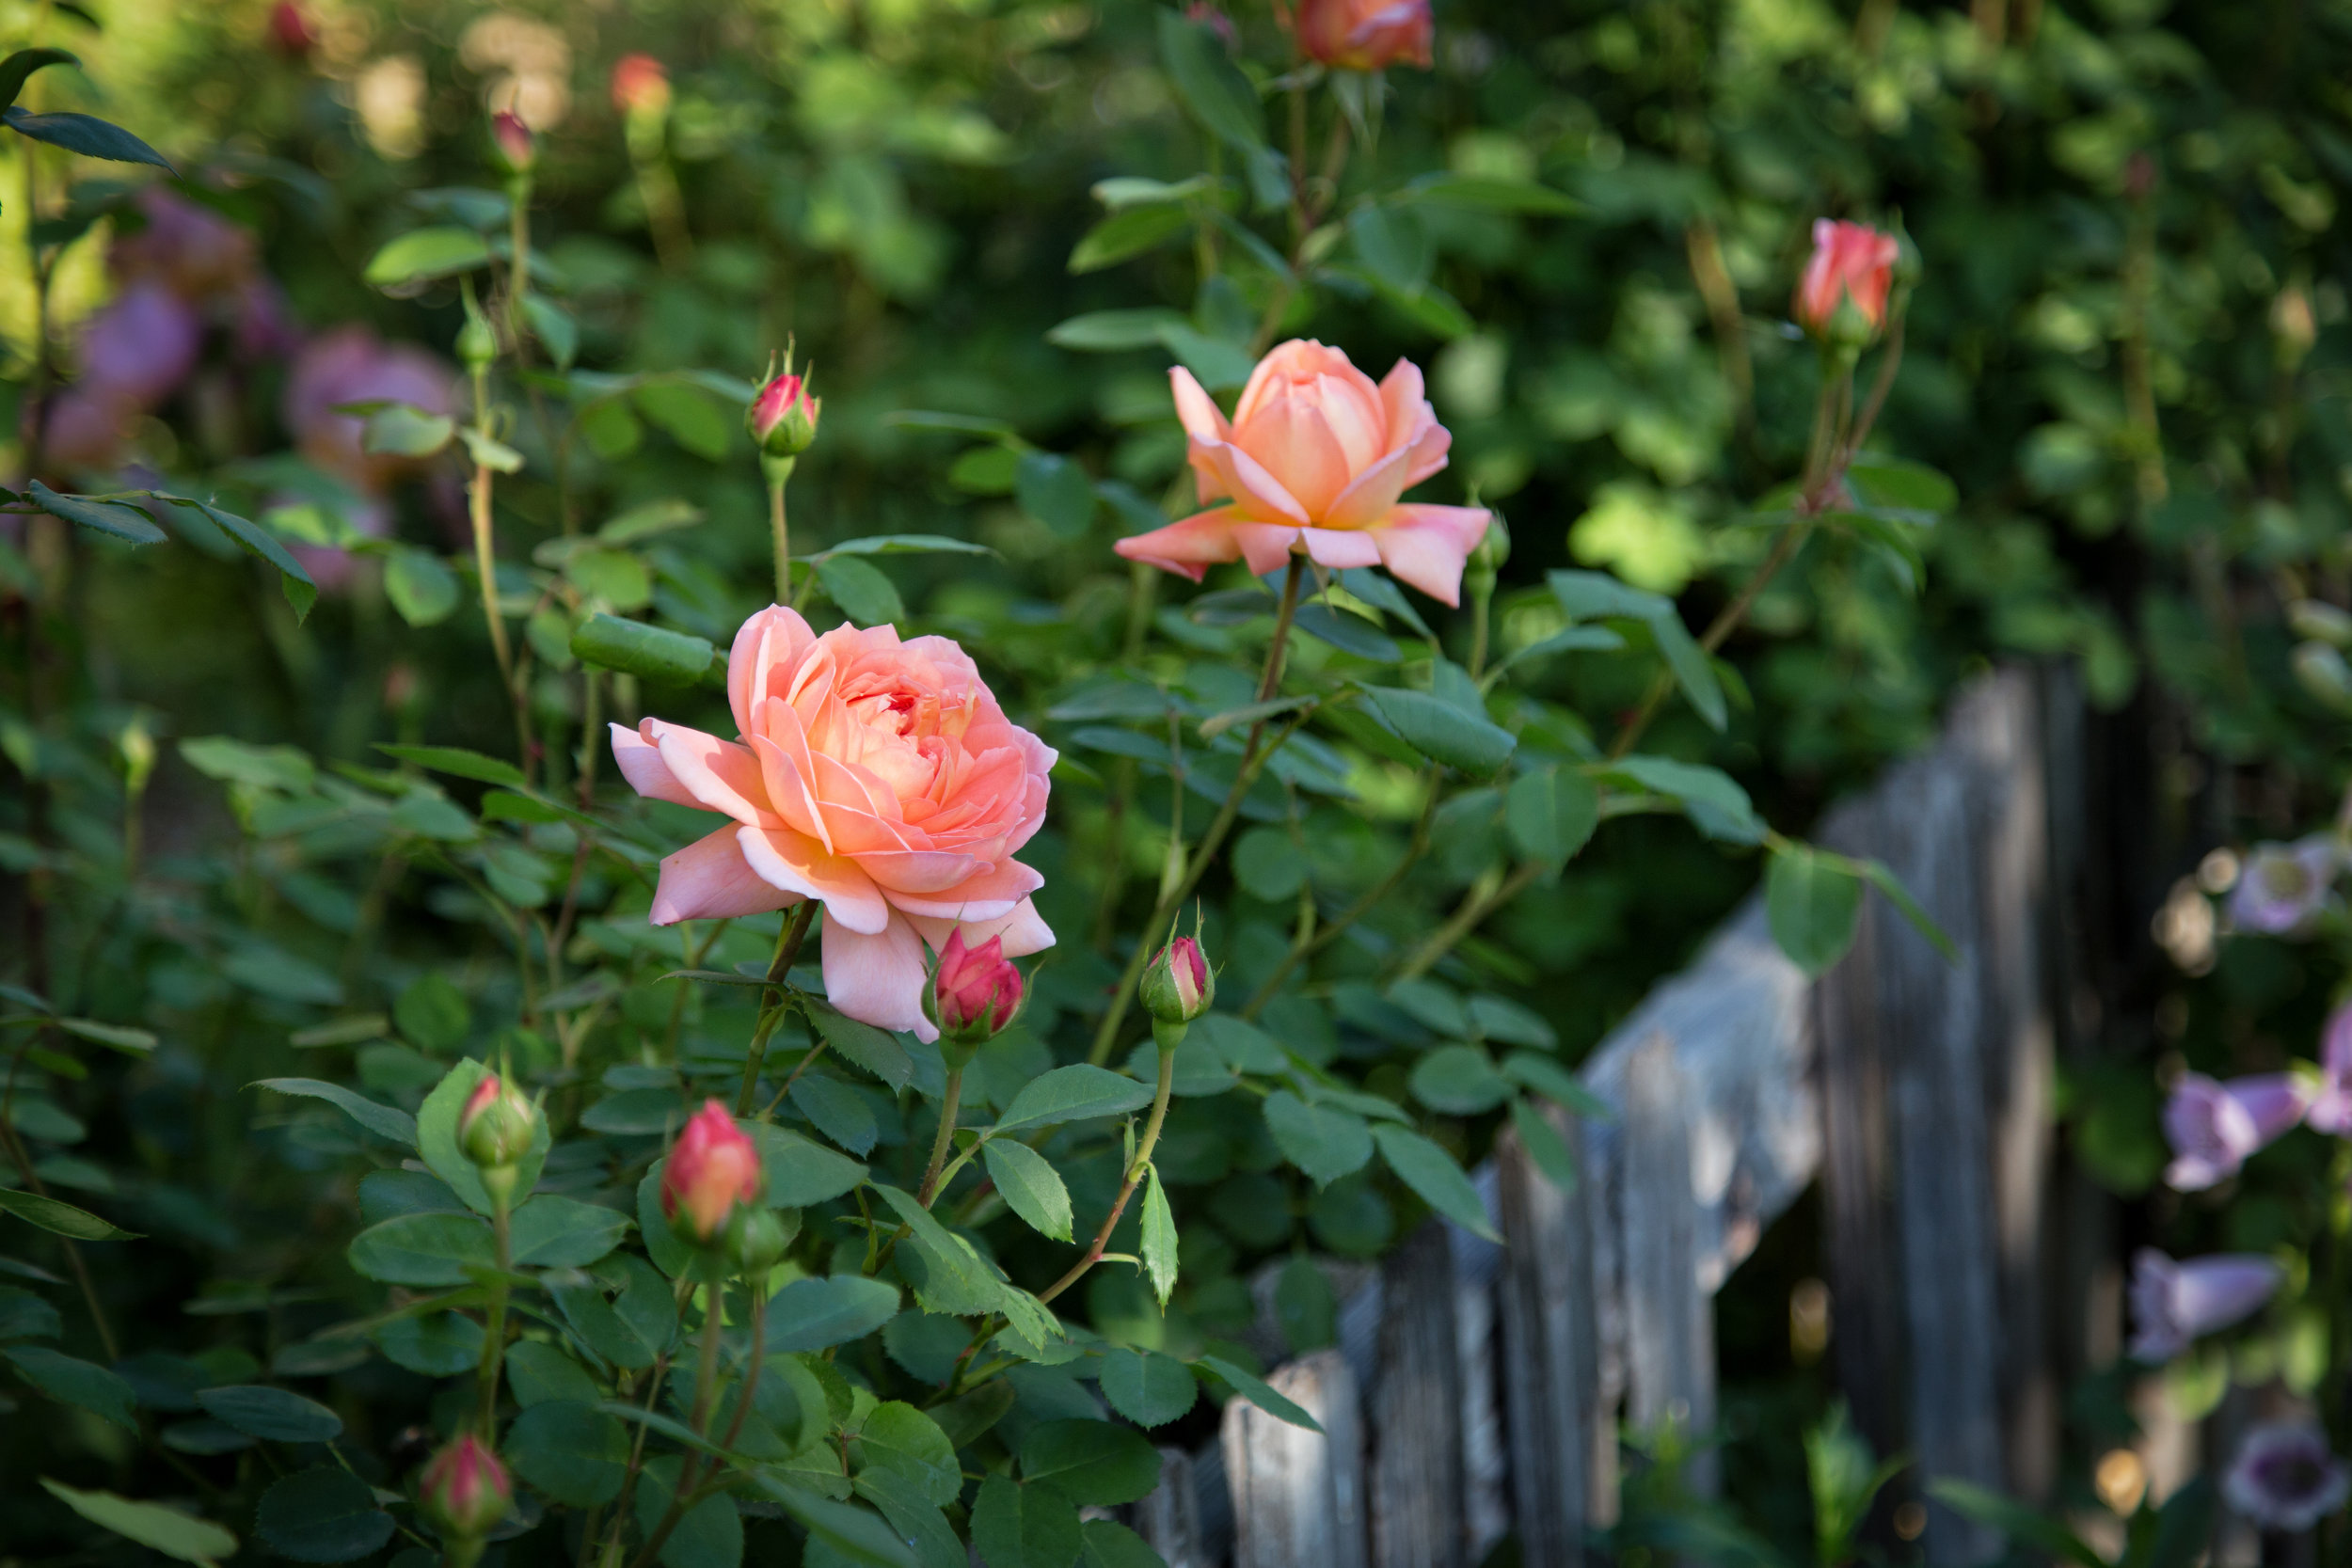 roses-at-the-cottage-fence_25636377343_o.jpg